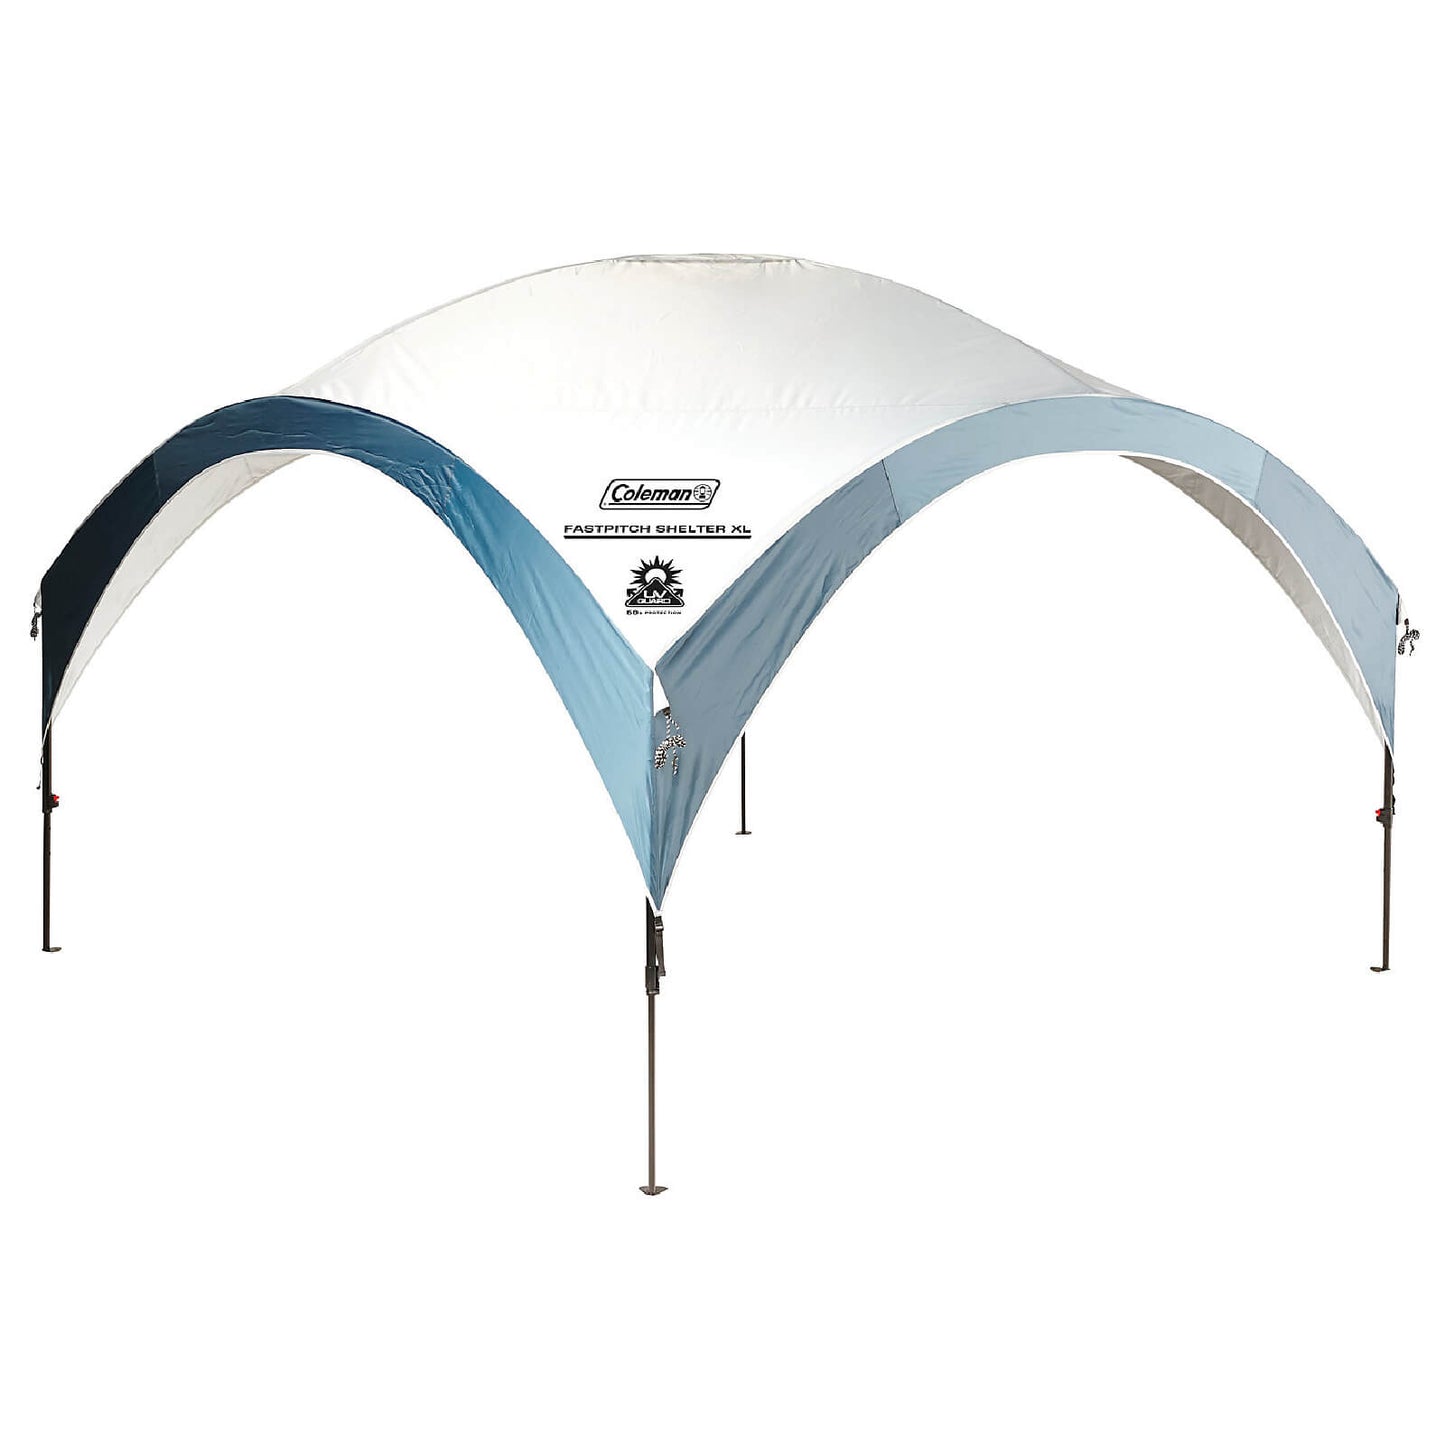 Event Shelter Coleman FastPitch Event Shelter Pro X Large (4.5x4.5m)